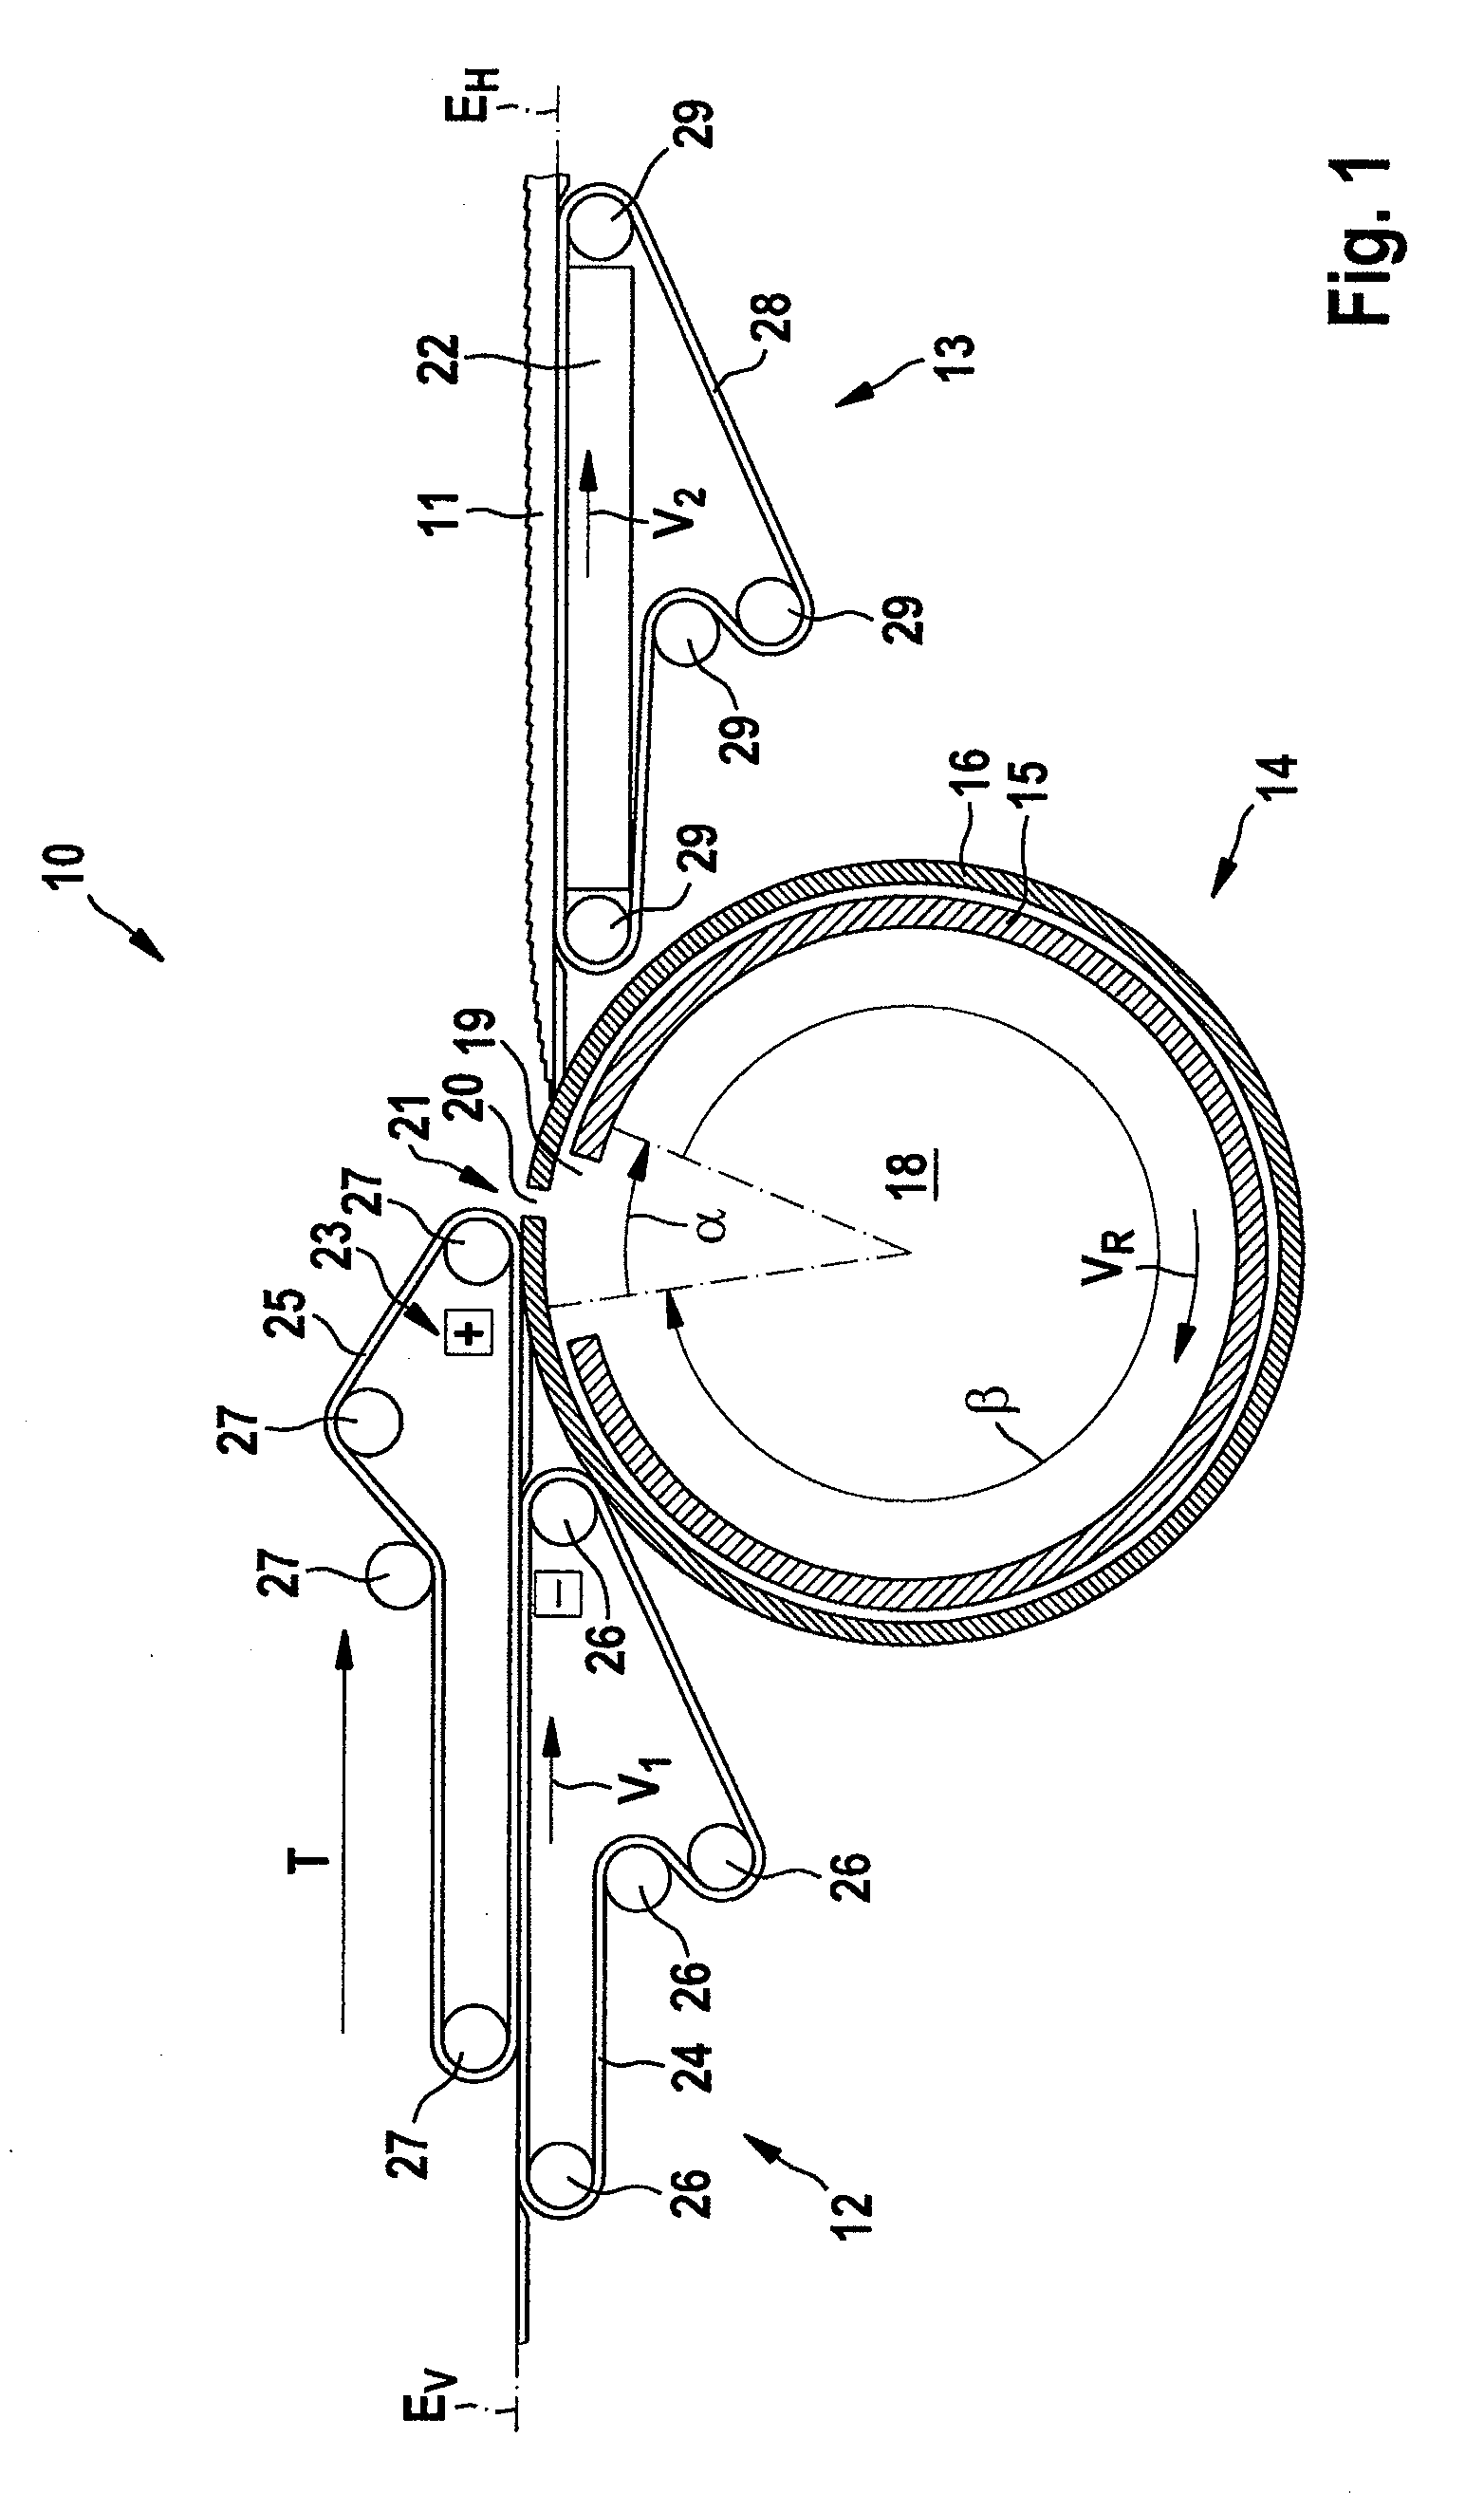 Apparatus and method for forming a stream of overlapping sheets or stacks of sheets